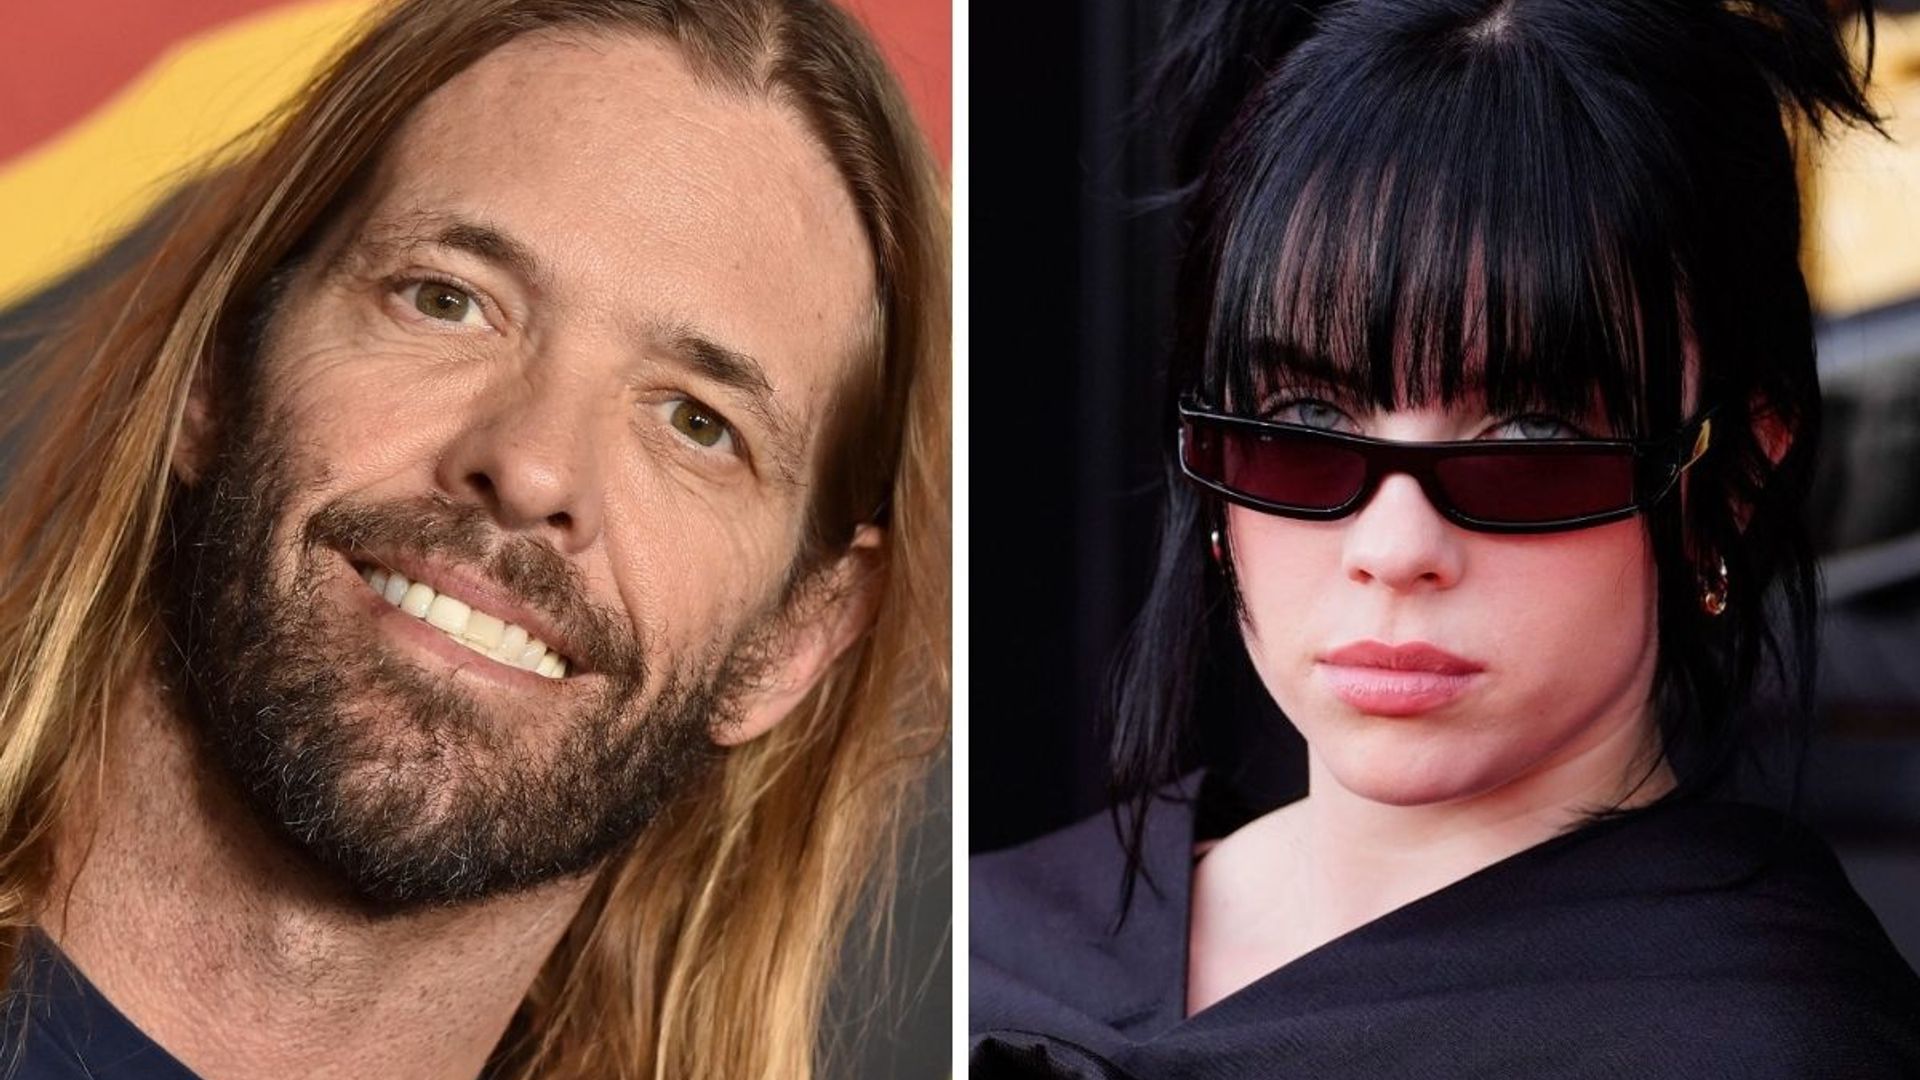 The touching way Billie Eilish paid tribute to Foo Fighters drummer Taylor Hawkins at the GRAMMYs